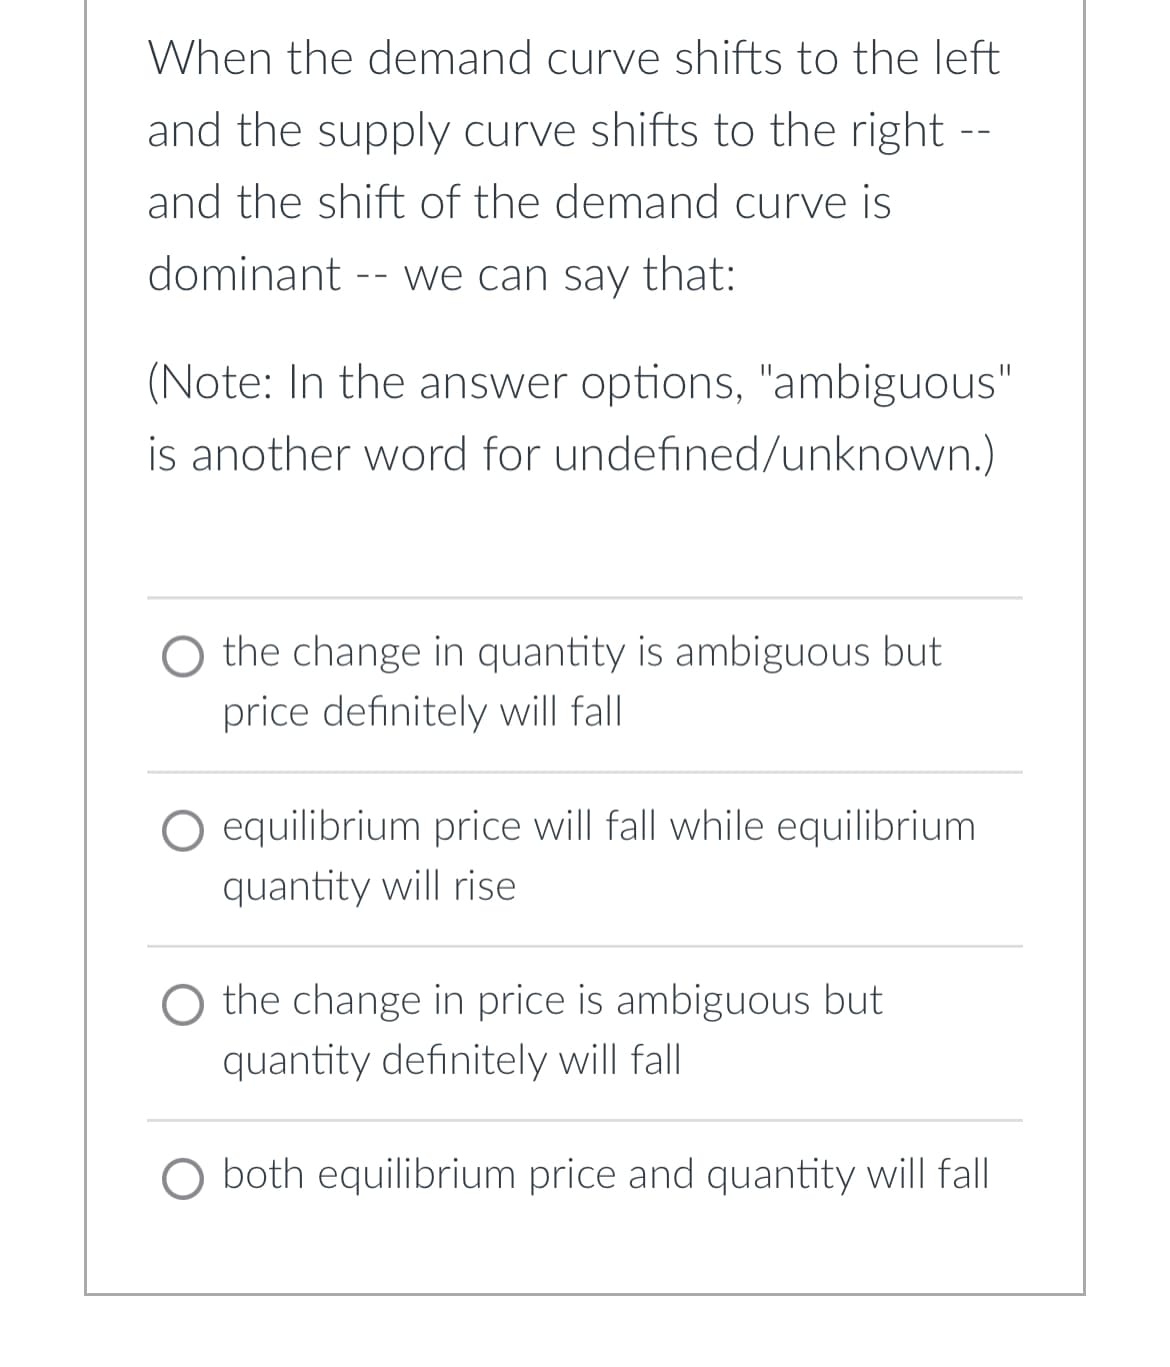 When the demand curve shifts to the left
and the supply curve shifts to the right --
and the shift of the demand curve is
dominant -- we can say that:
(Note: In the answer options, "ambiguous"
is another word for undefined/unknown.)
O the change in quantity is ambiguous but
price definitely will fall
equilibrium price will fall while equilibrium
quantity will rise
O the change in price is ambiguous but
quantity definitely will fall
O both equilibrium price and quantity will fall